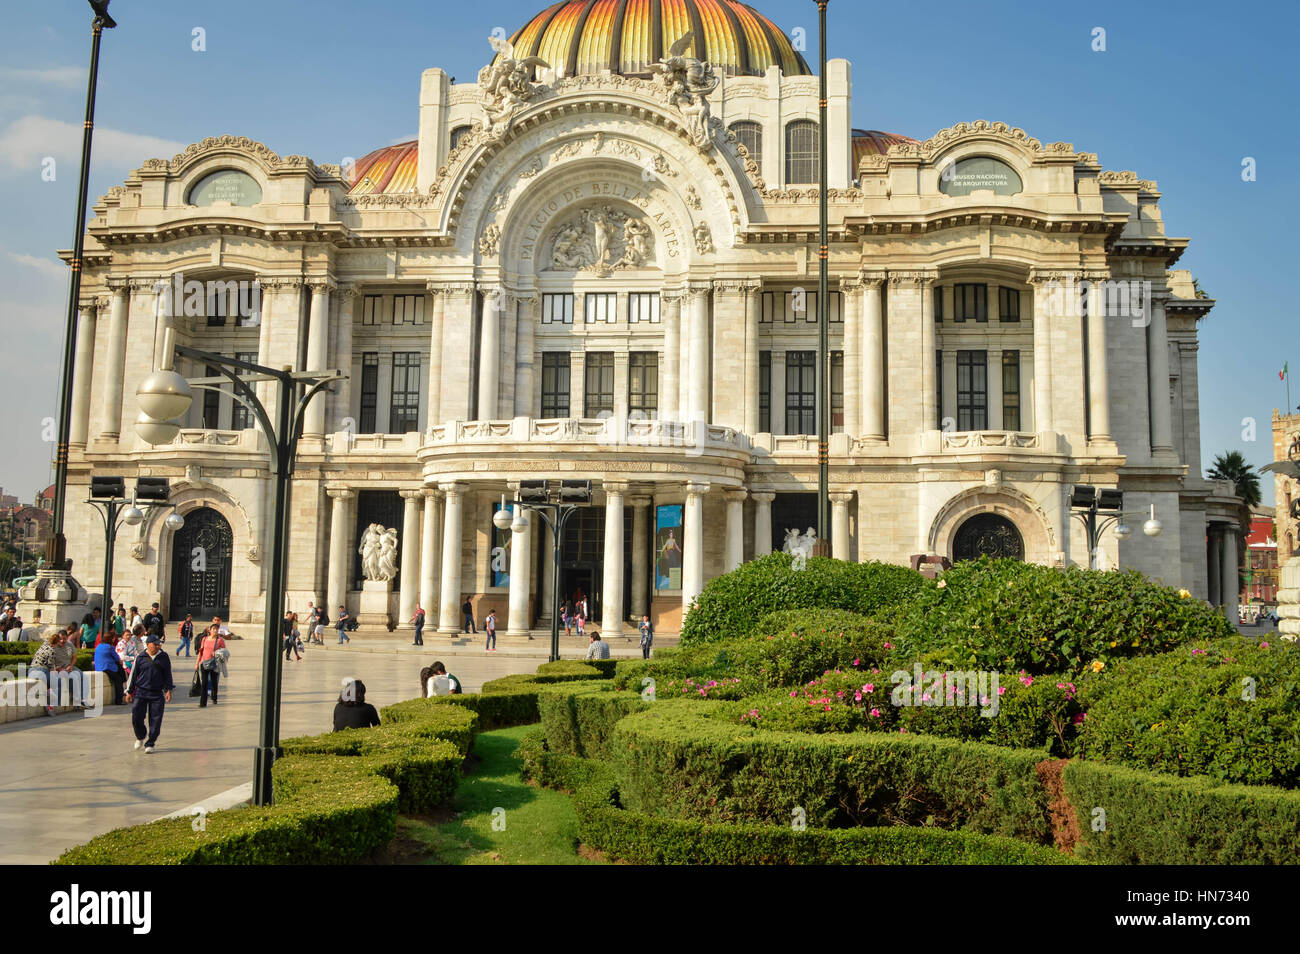 Mexico City, Mexico - November 3, 2014: People spend time in front of the famous Palace of Fine Arts near Alameda Central Park in Mexico city Stock Photo